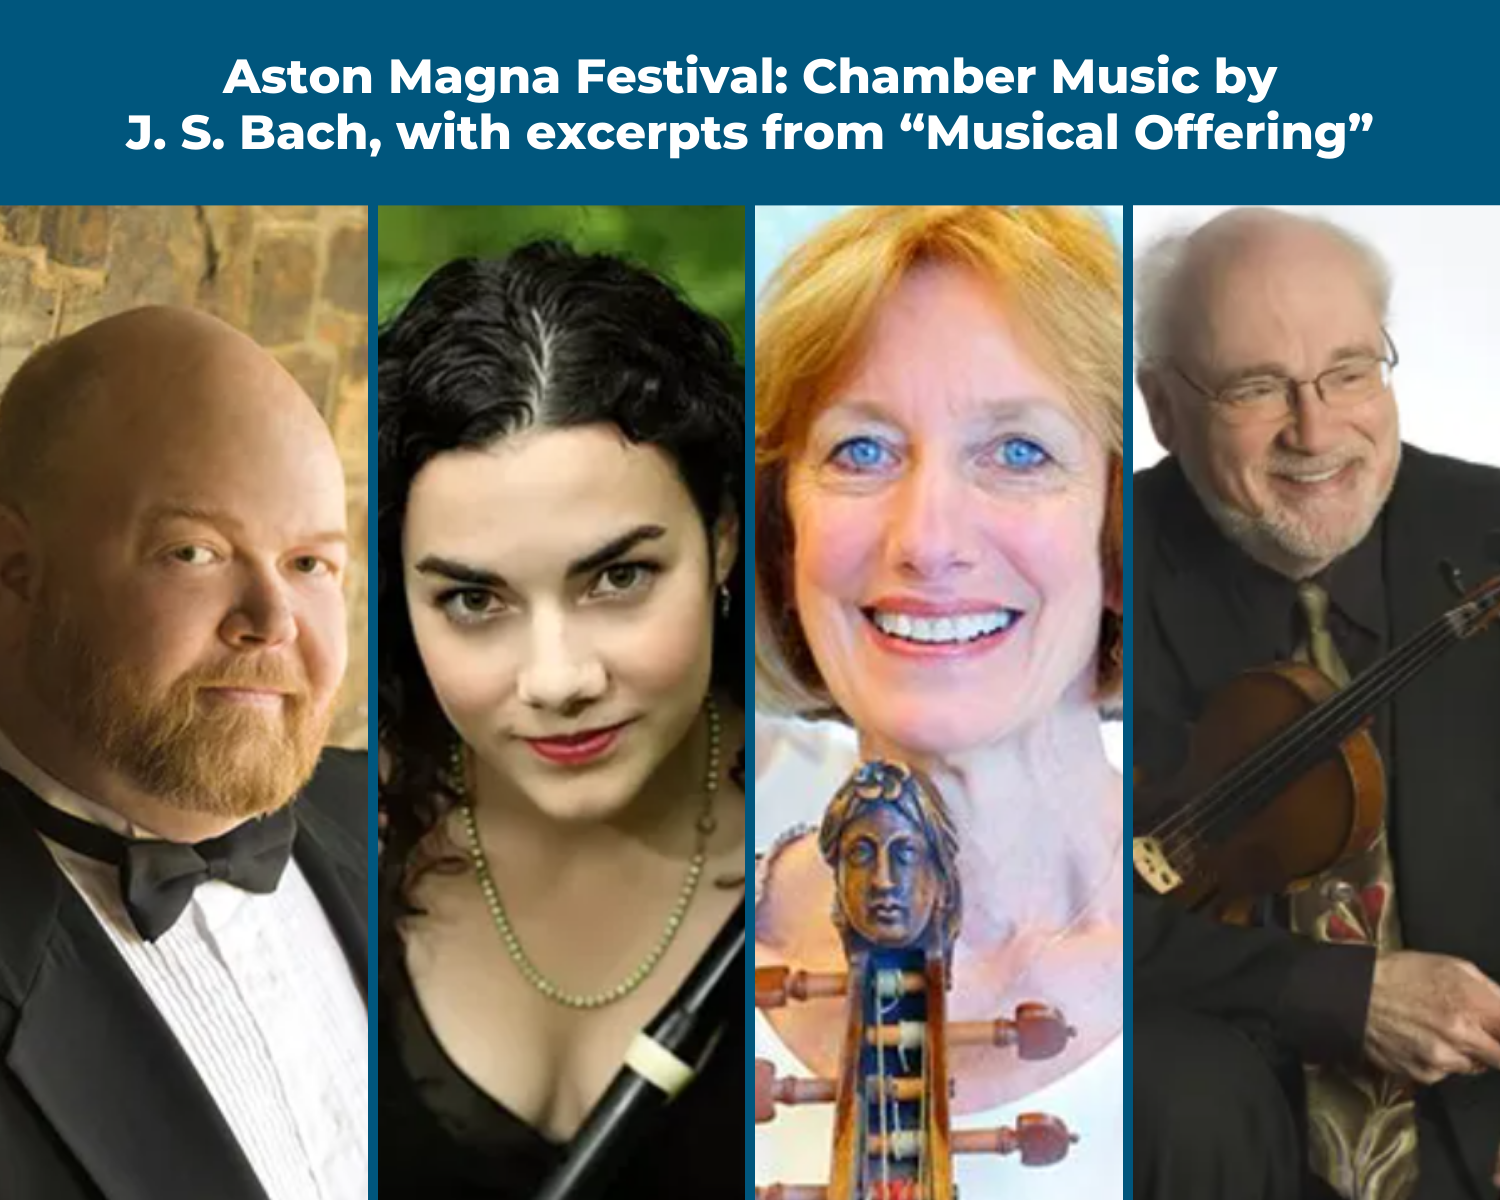 Aston Magna Music Festival: Chamber Music by J.S. Bach with Excerpts from "Musical Offering"